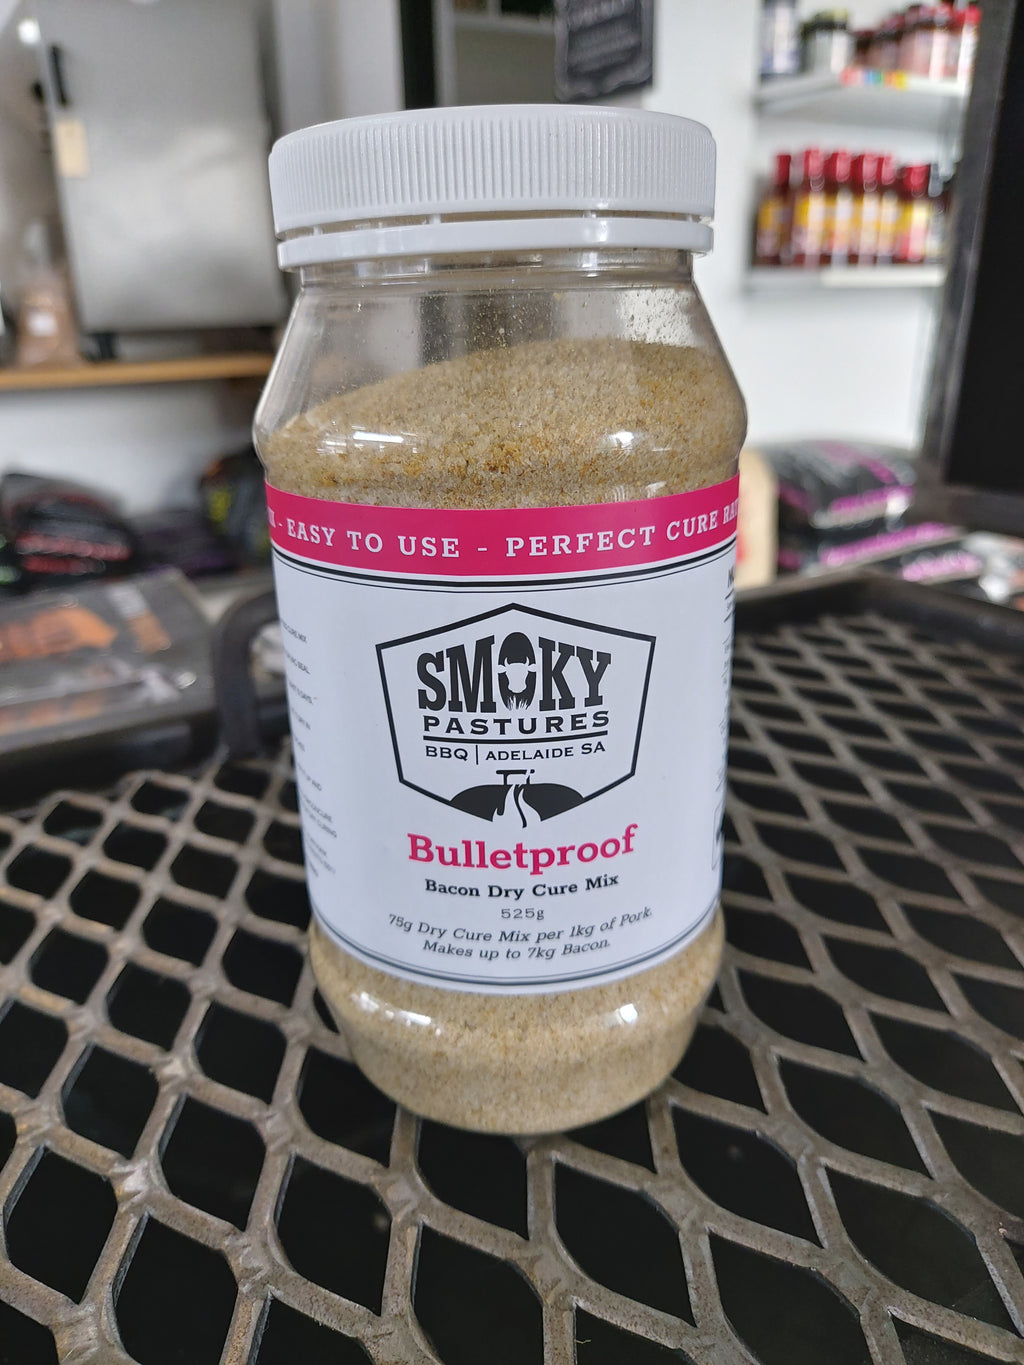 Bulletproof Bacon Dry Cure Mix 525g by Smoky Pastures